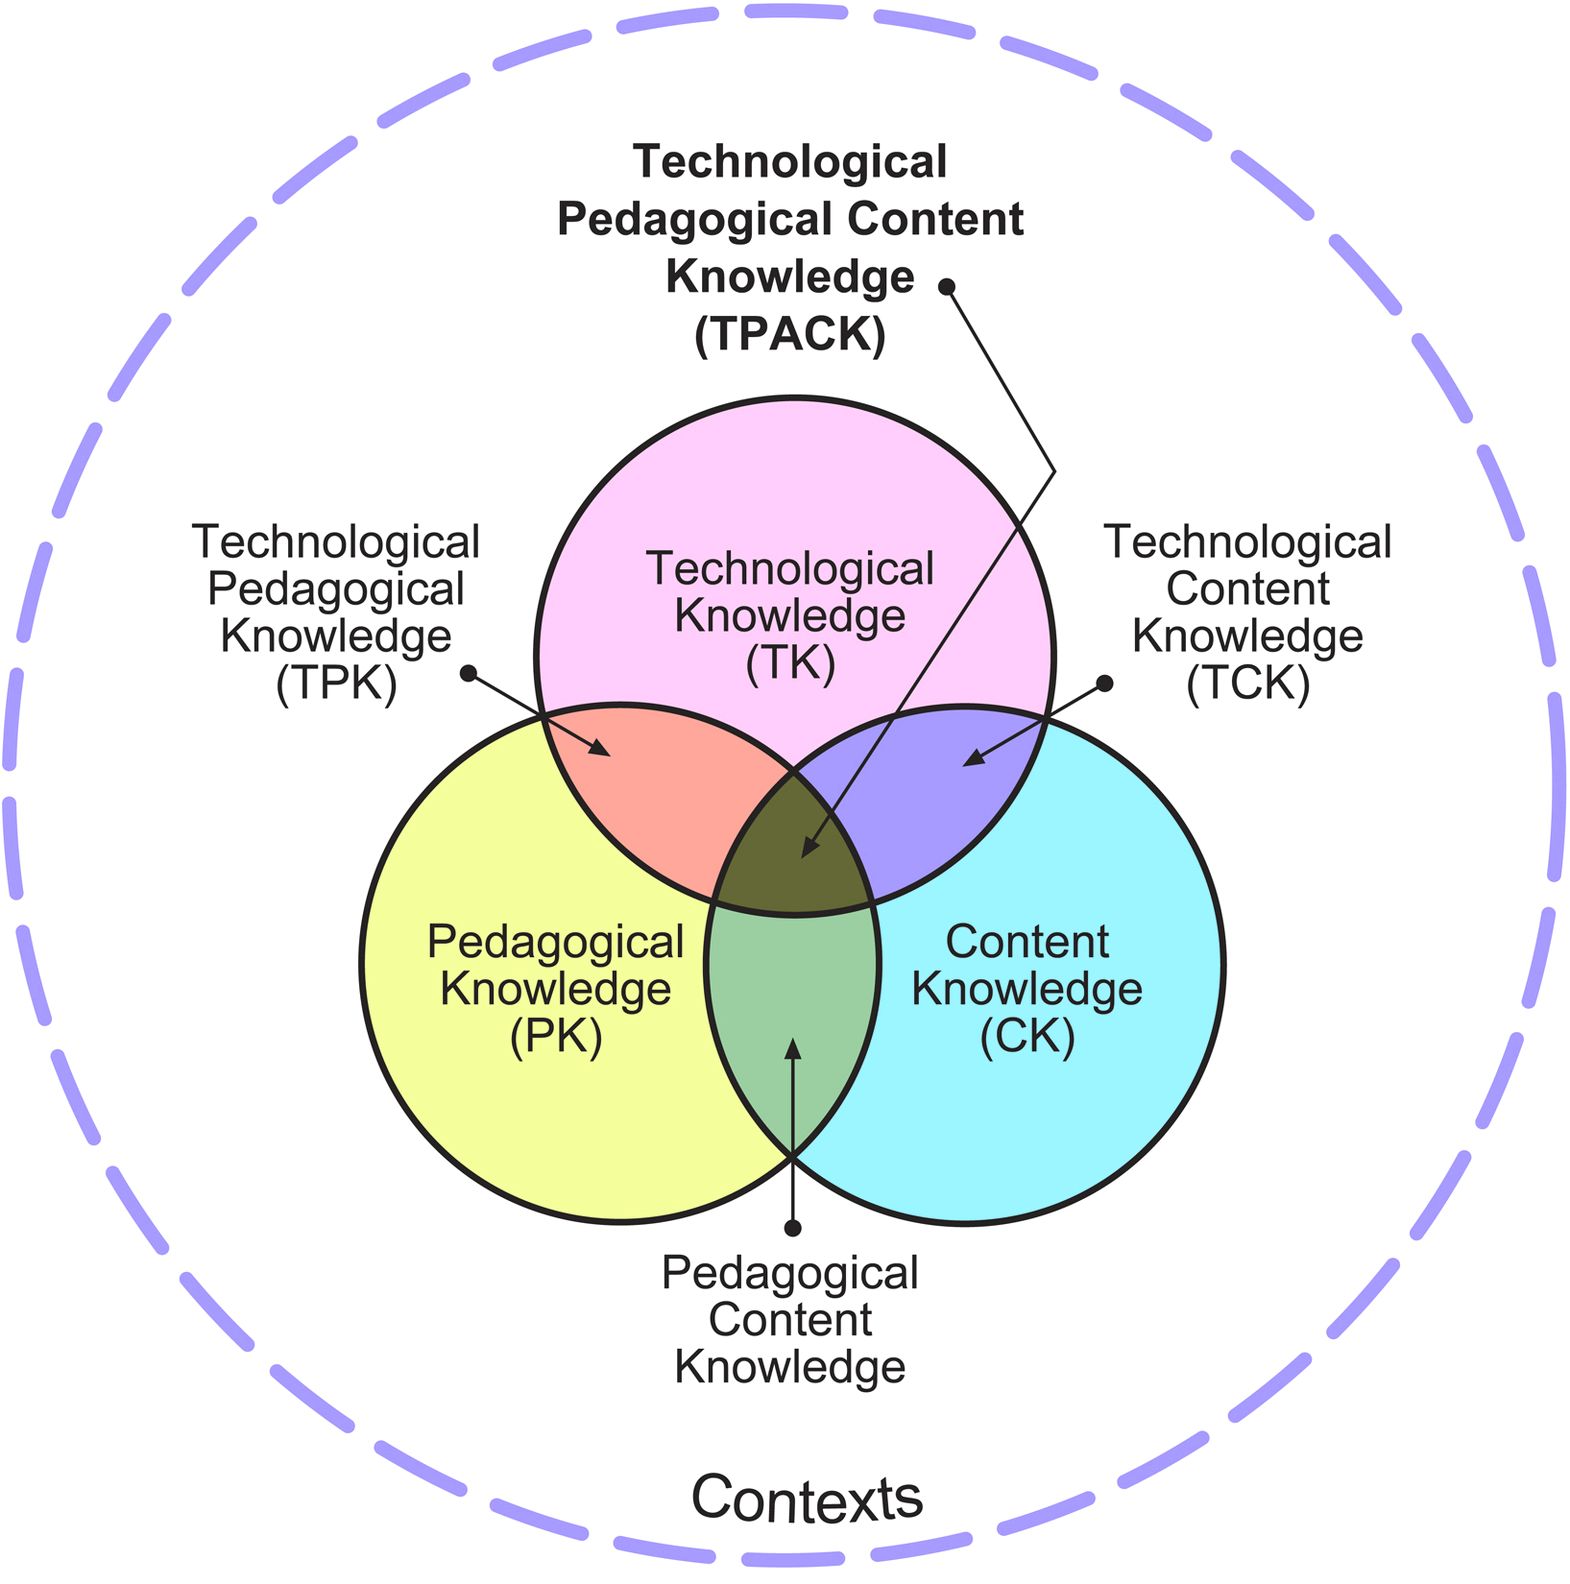 The information technology role in education diagram